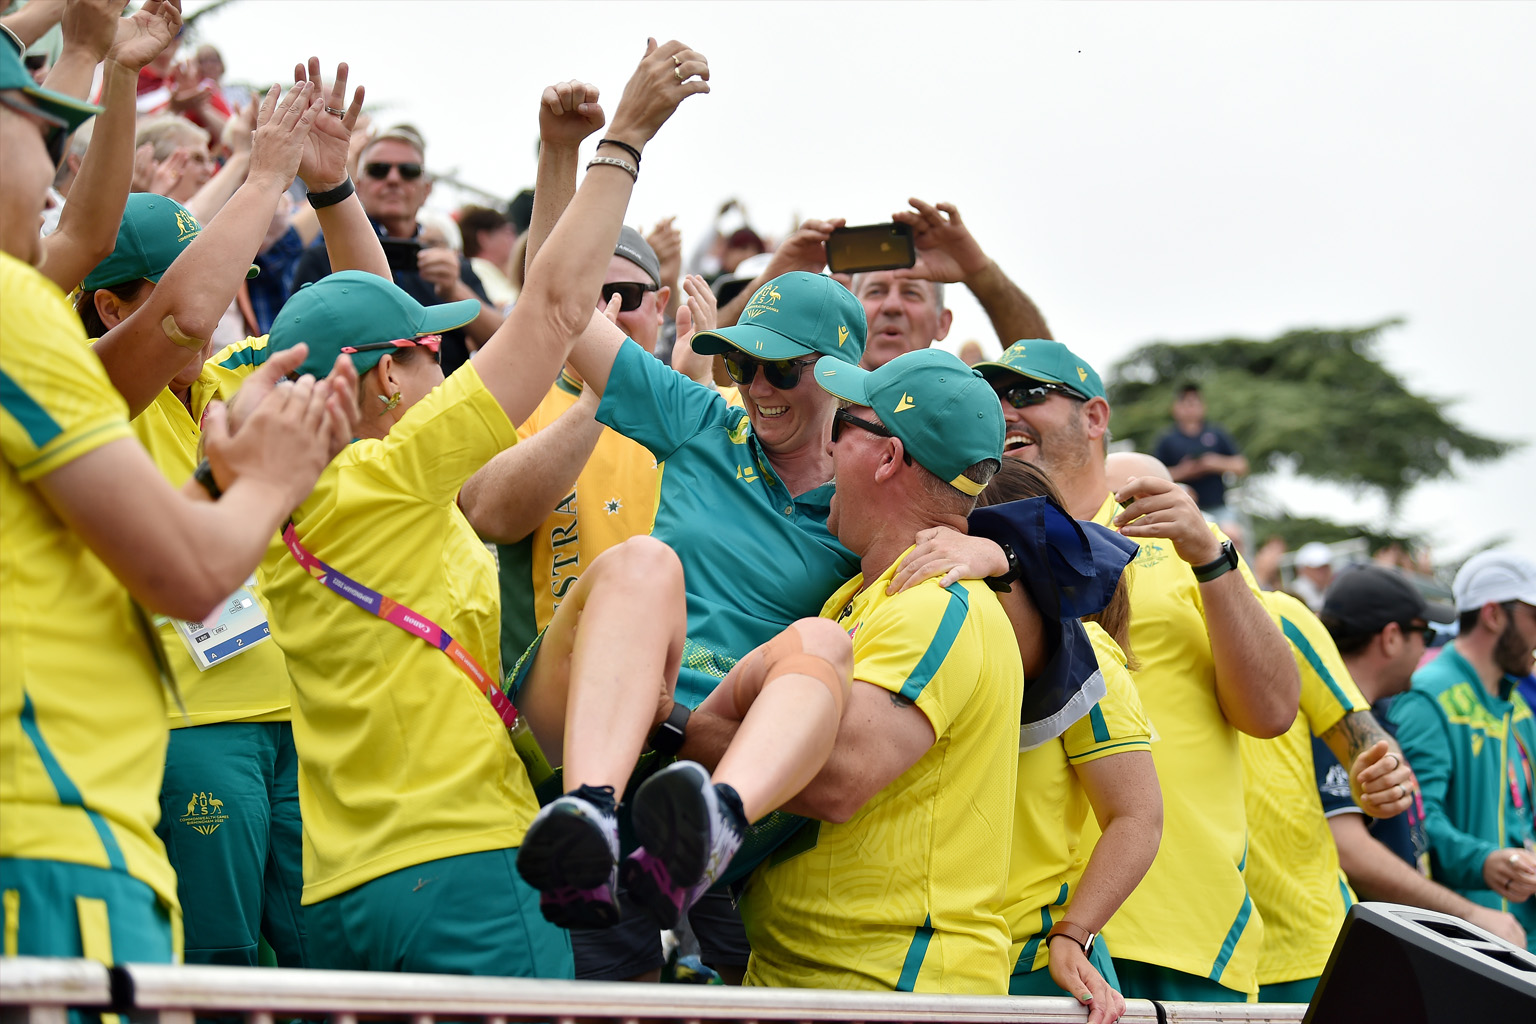 Members of Team Australia wearing green and gold uniforms hold up Ellen Ryan in celebration.